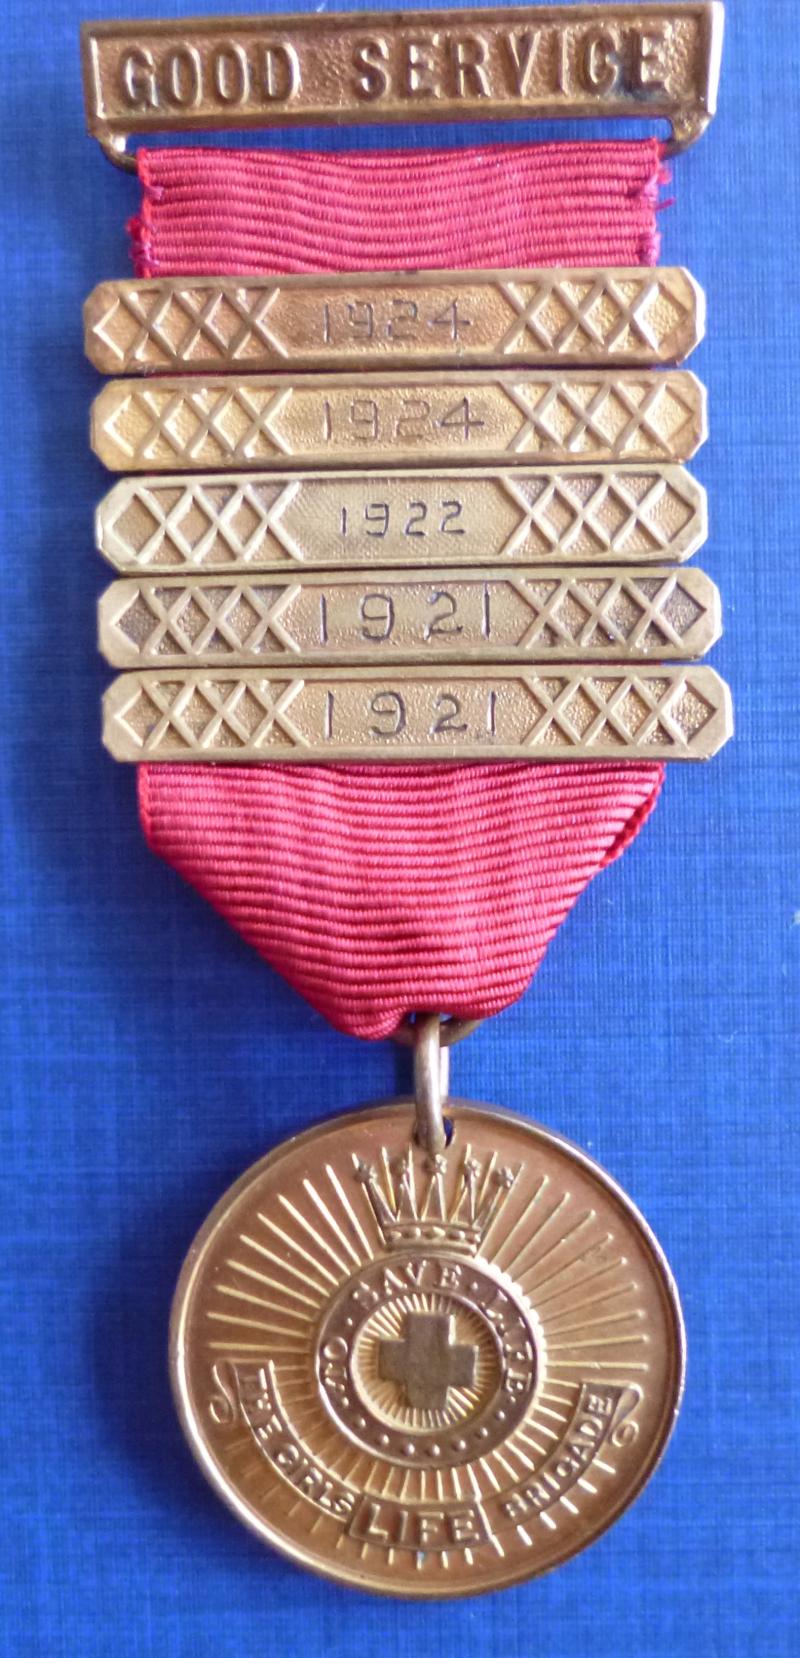 Girls' Life Brigade Medal with five Service Clasps.